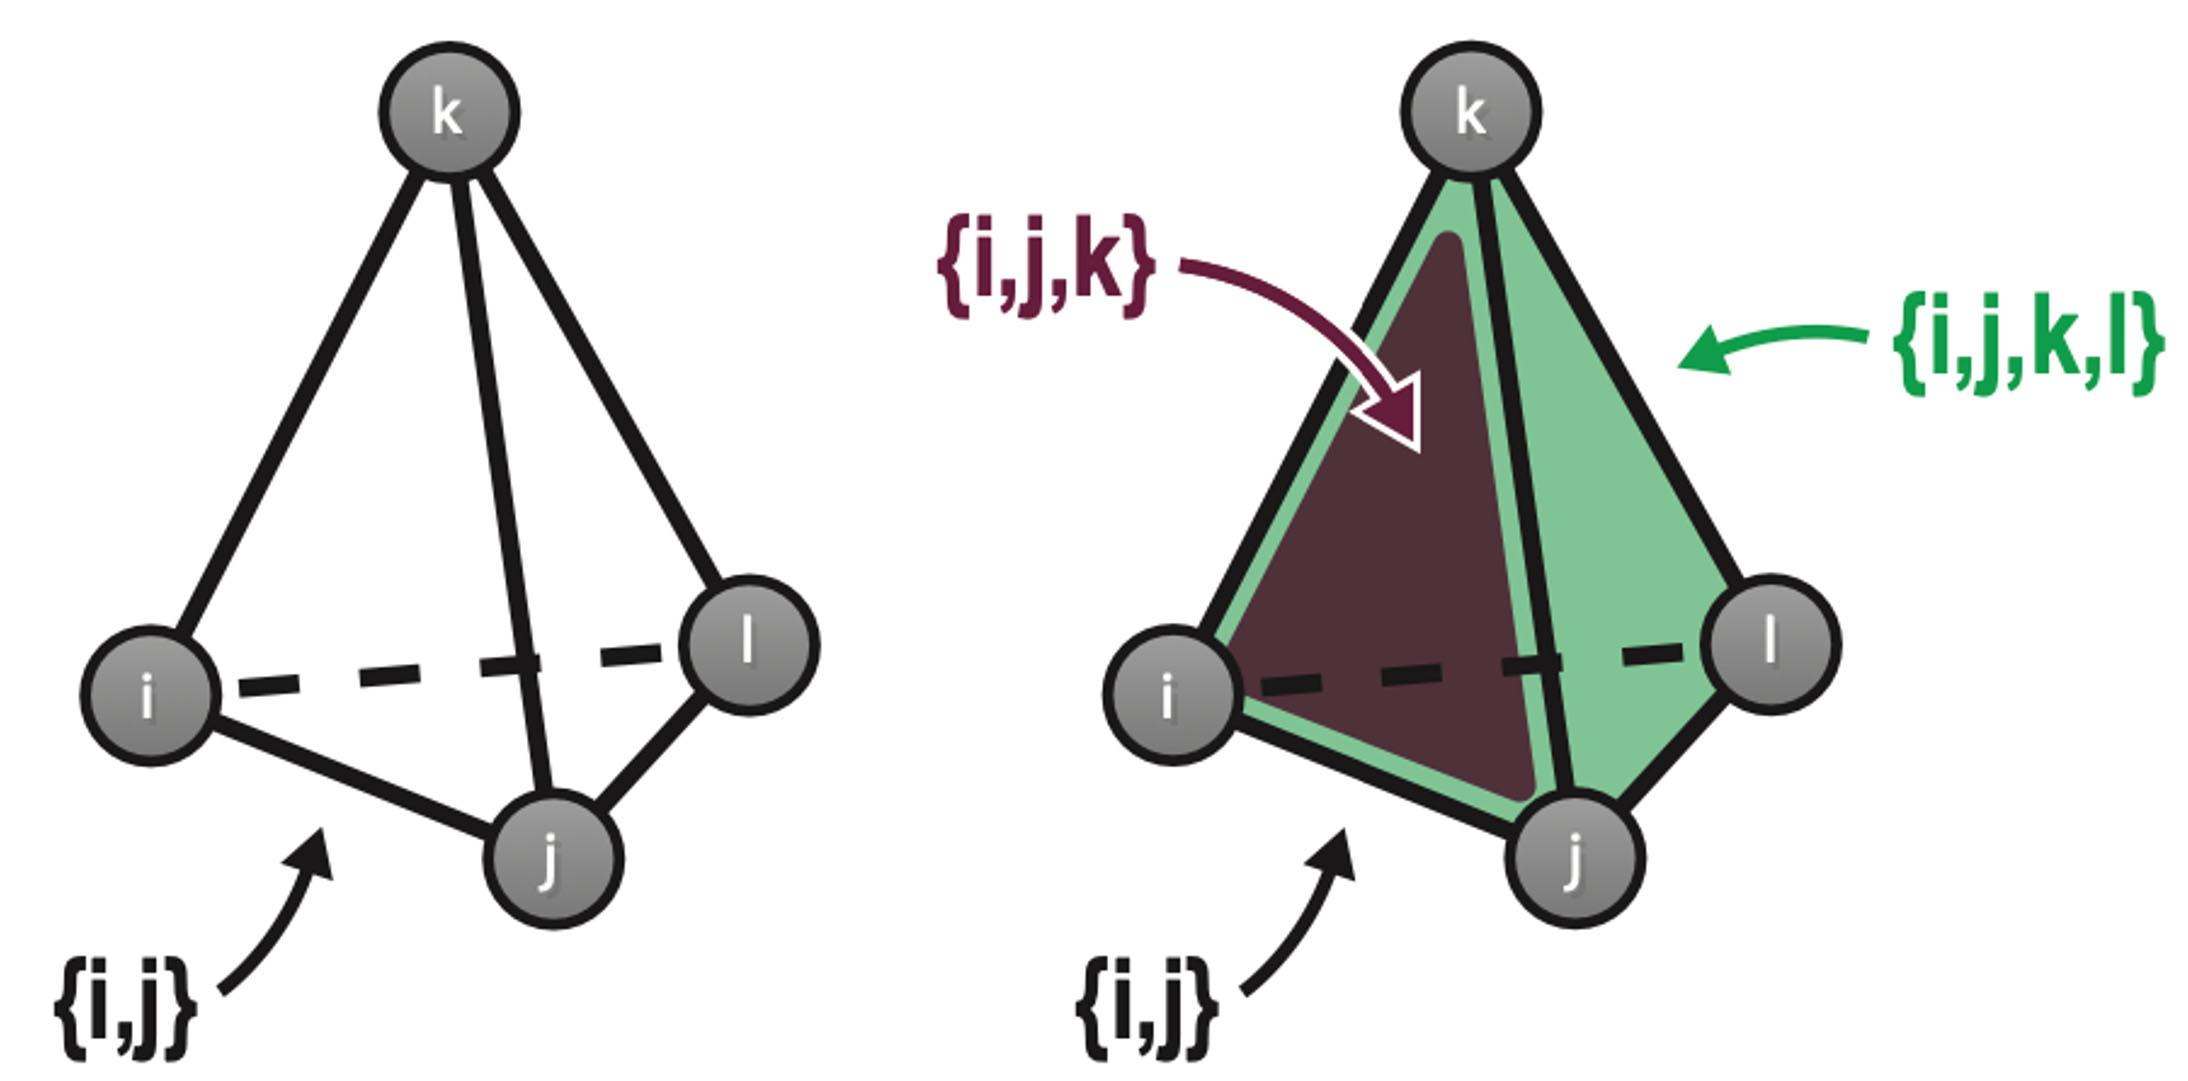 Diagrams of connections in Hopfield networks